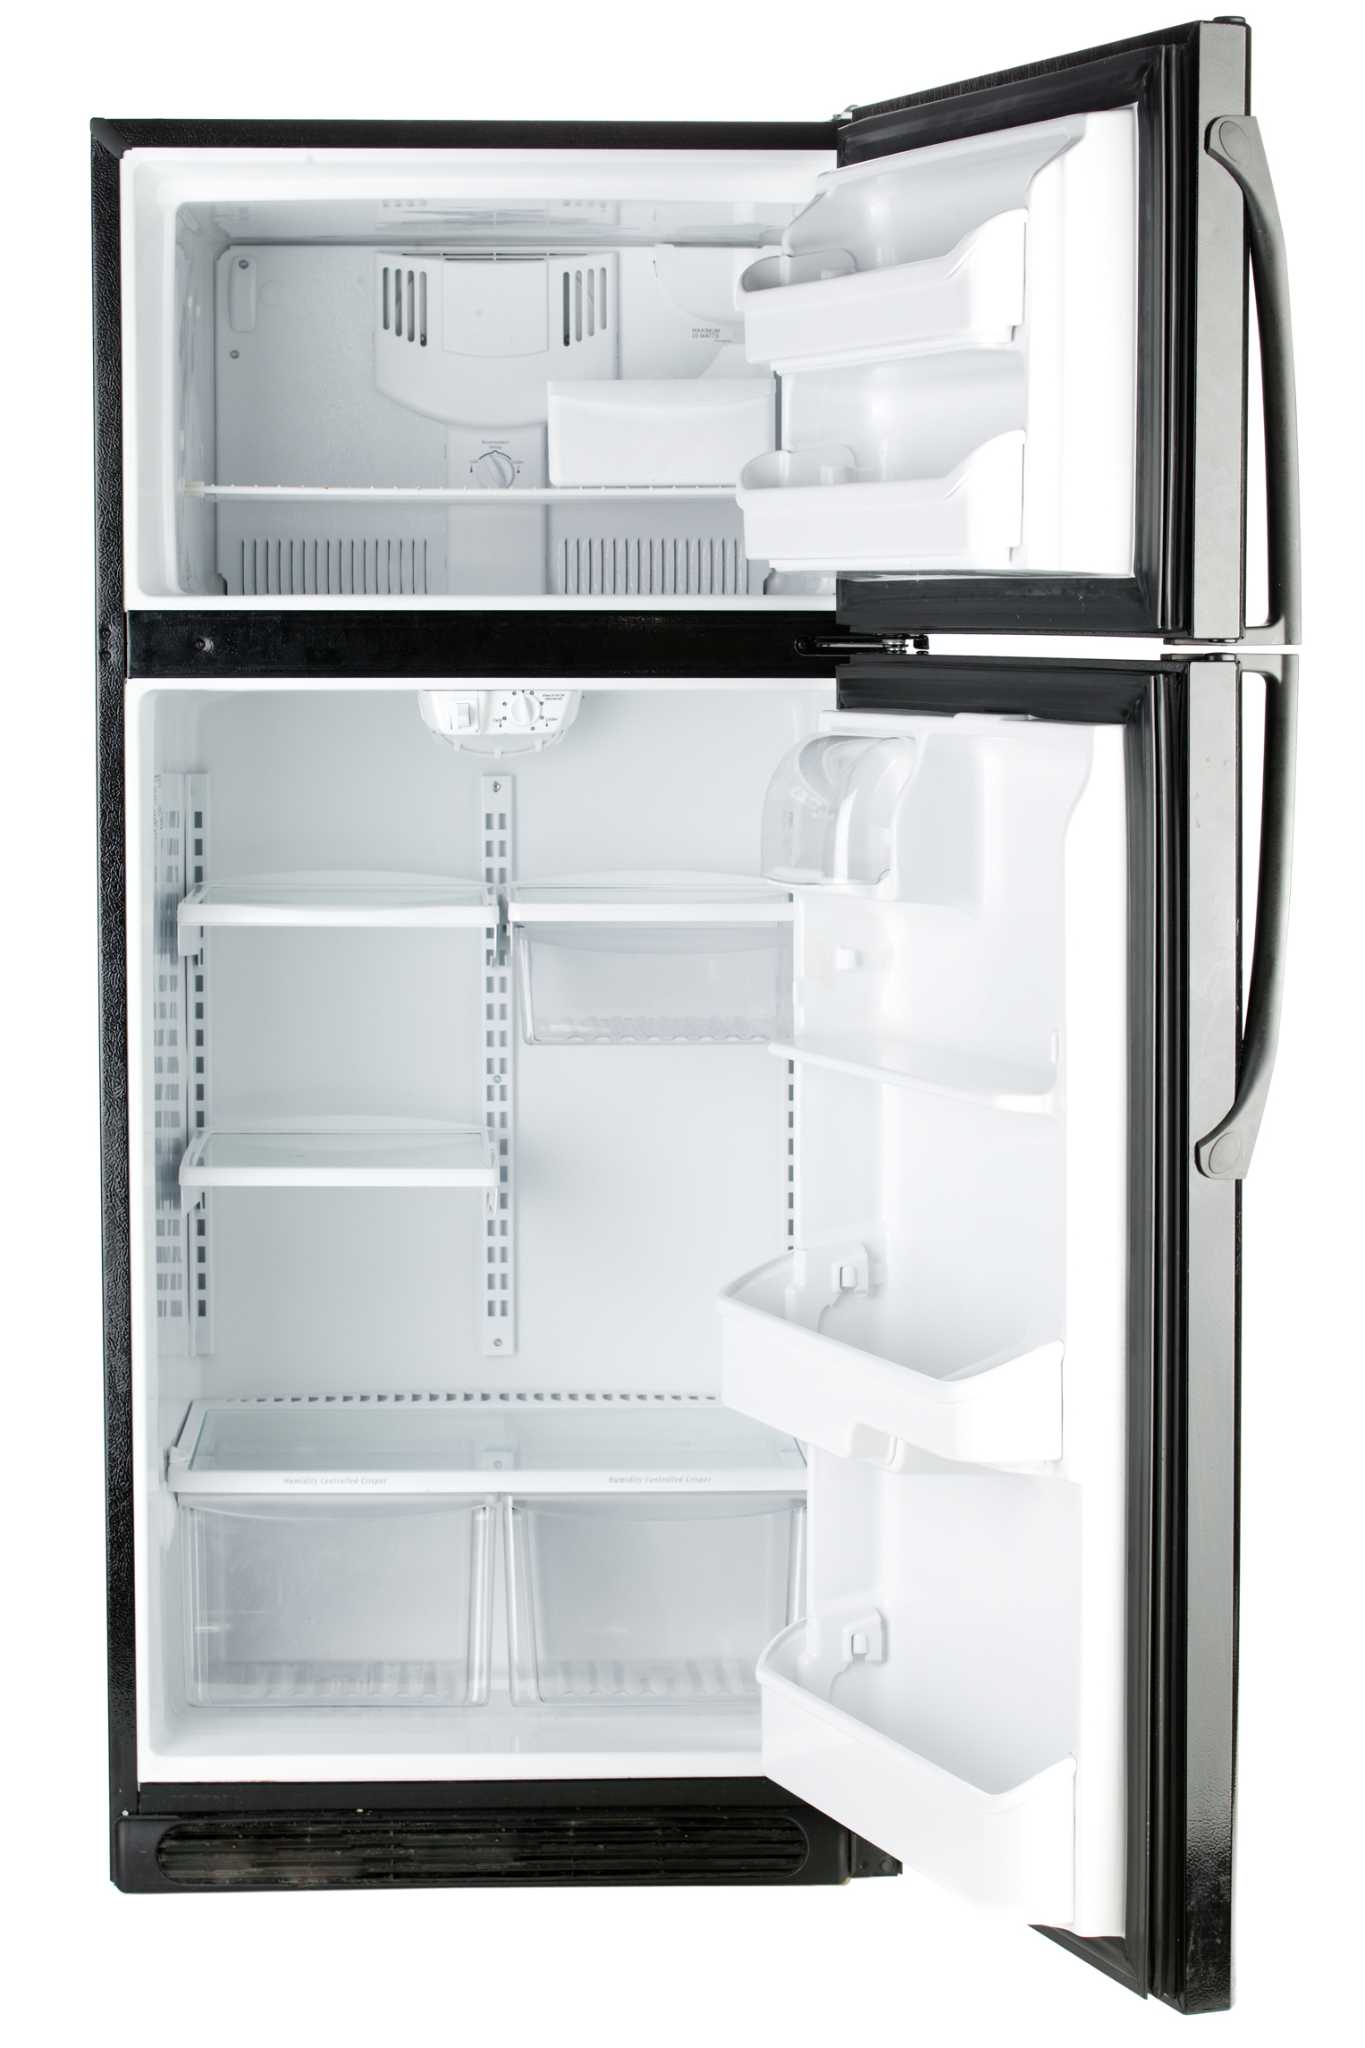 How to clean your fridge freezer drip tray 